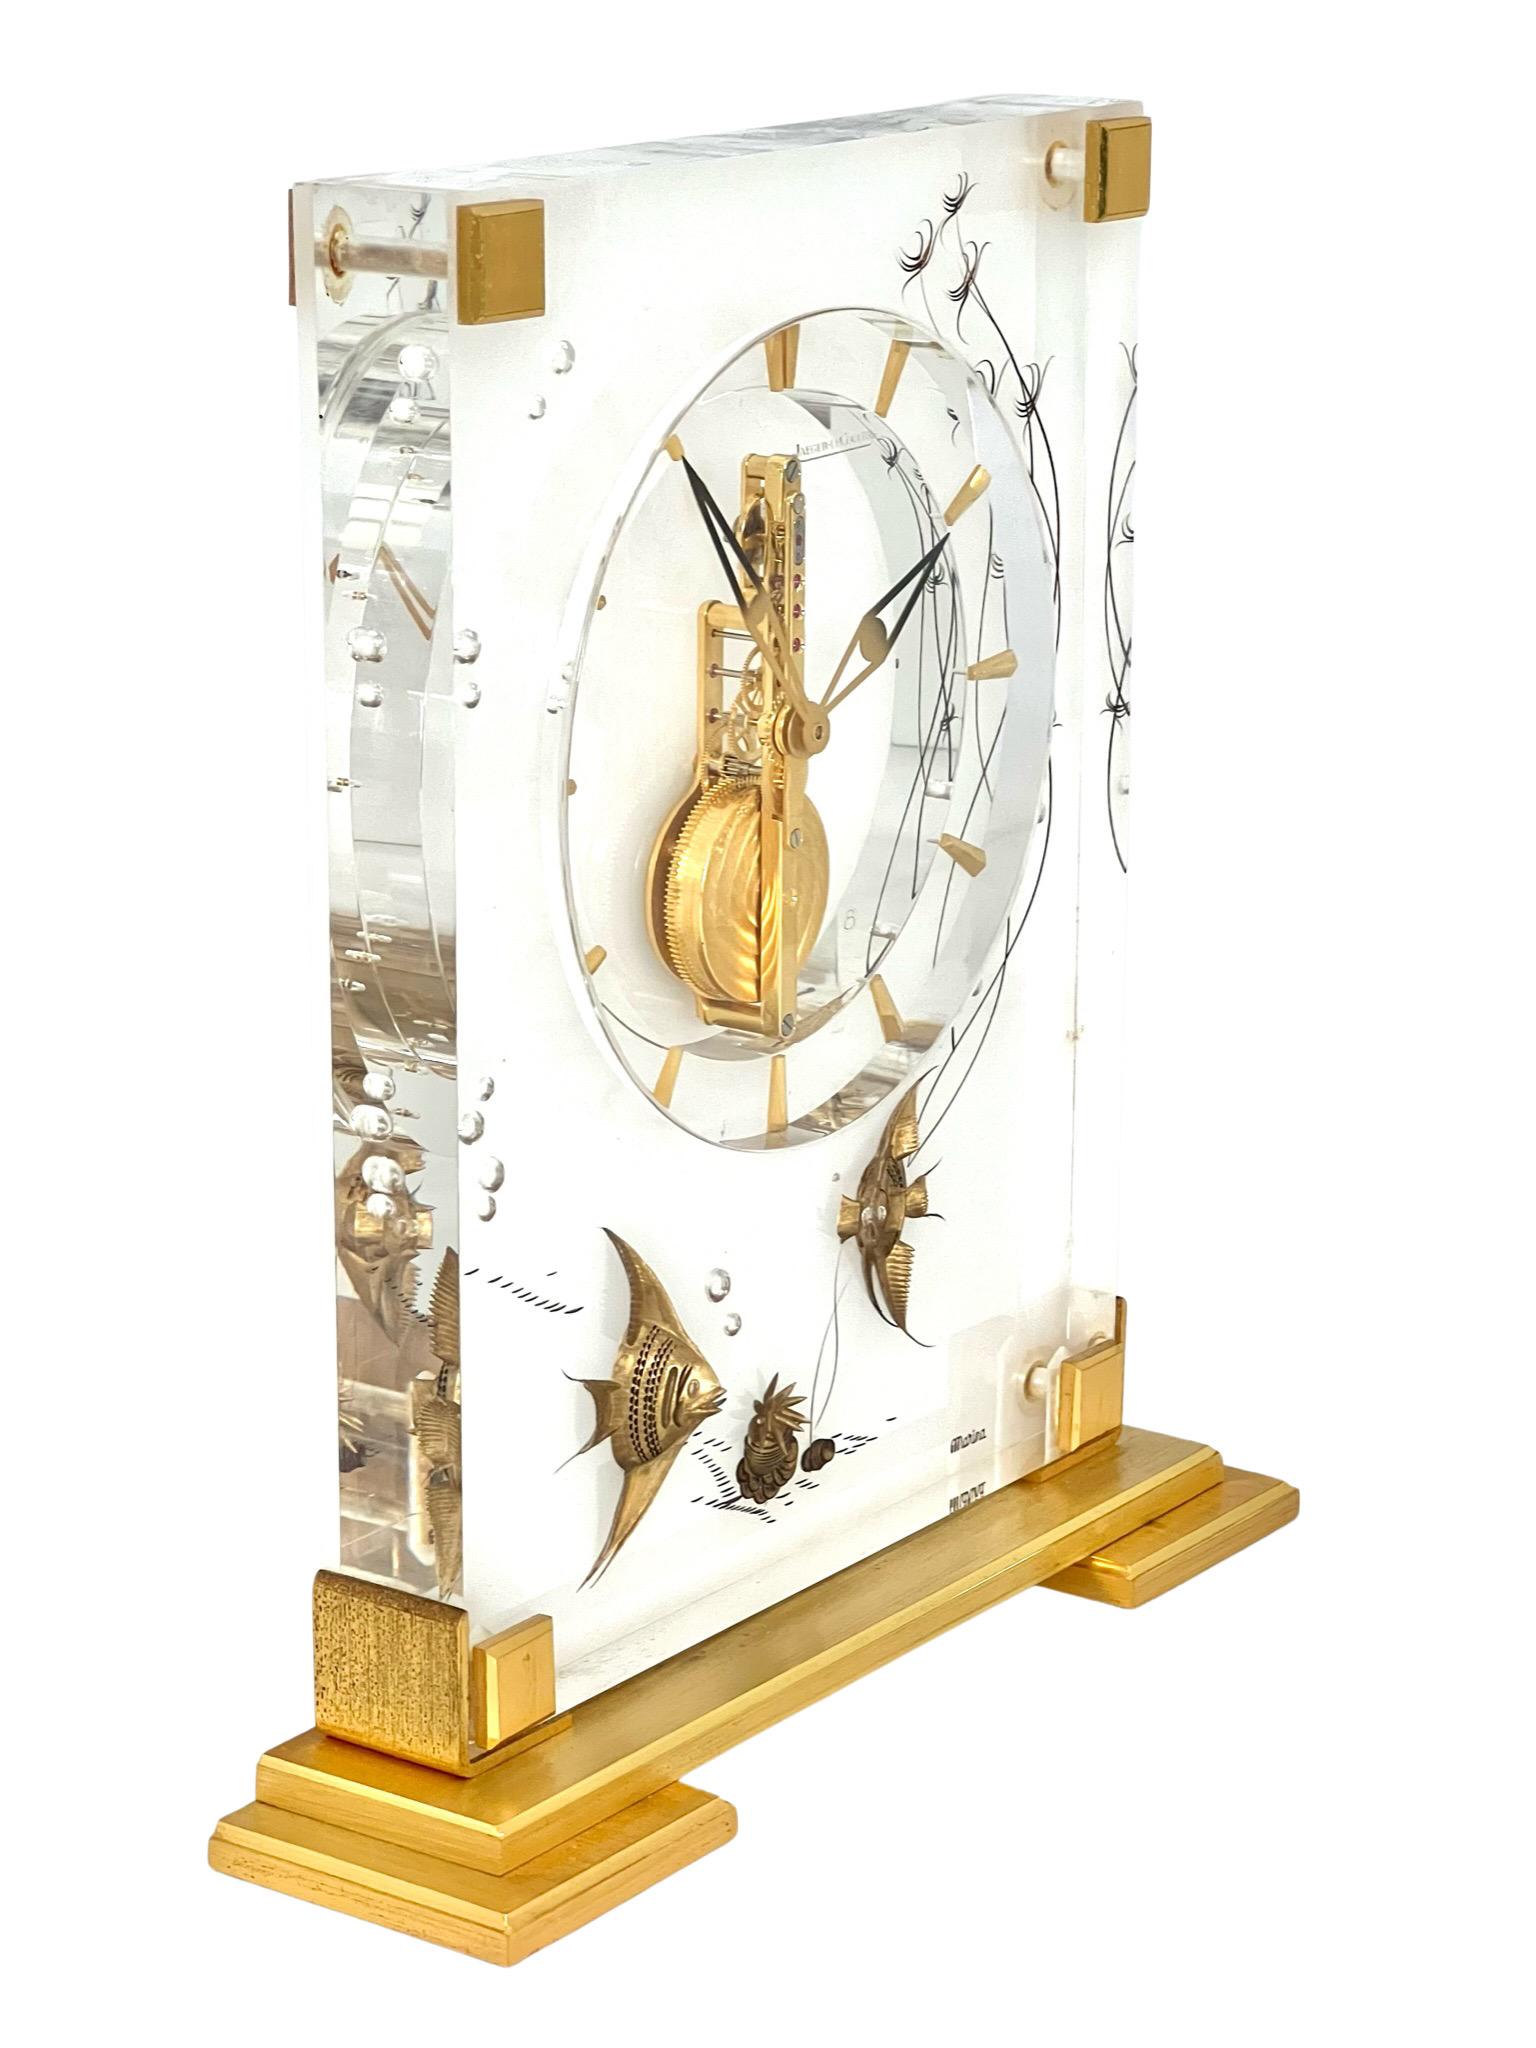 Jaeger LeCoultre Mid-Century Brass and Glass Maritime Marina Clock No. 352 8